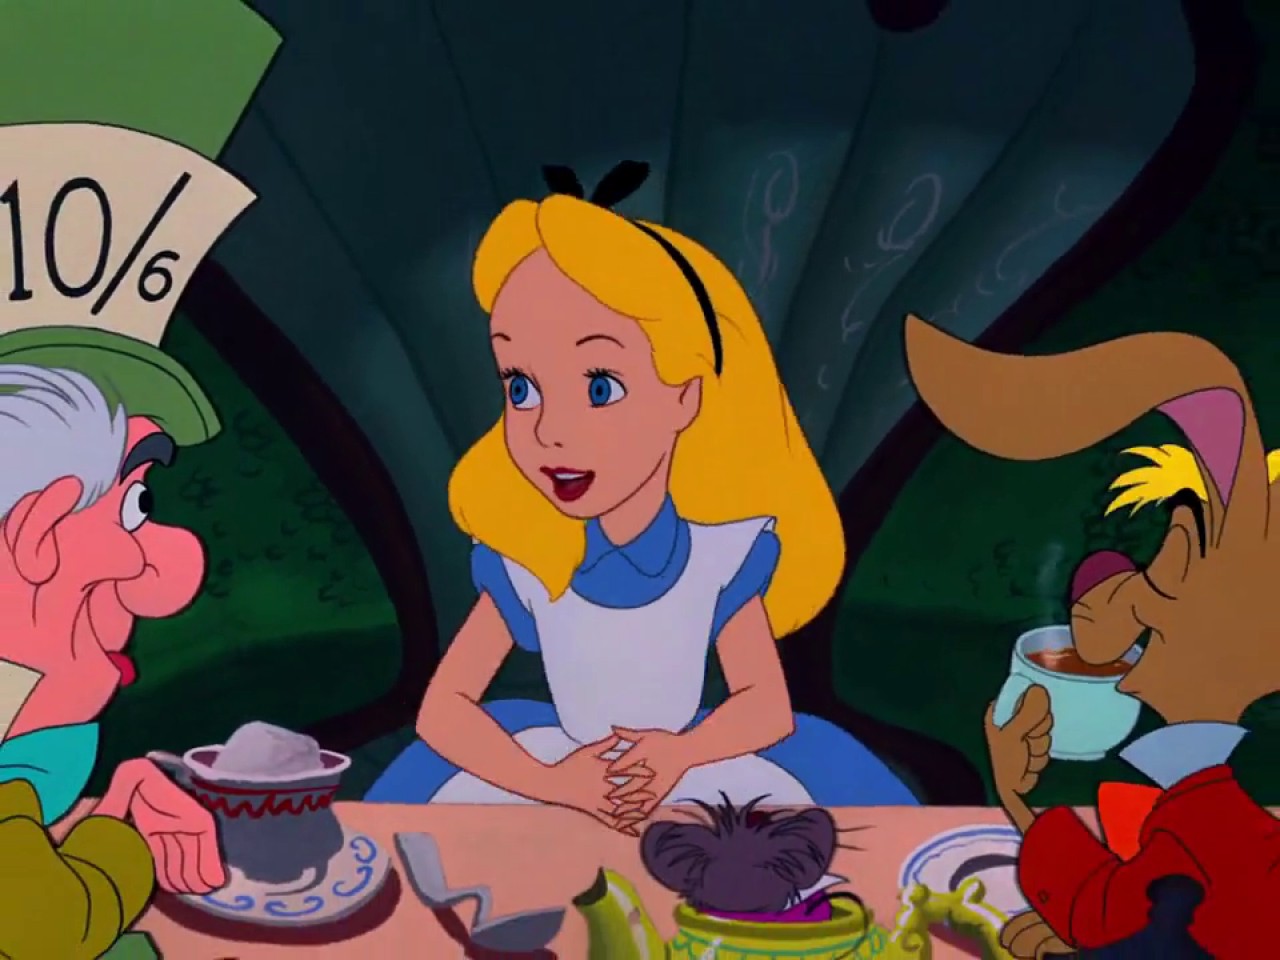 Alice In Wonderland (1951) Backgrounds, Compatible - PC, Mobile, Gadgets| 1280x960 px